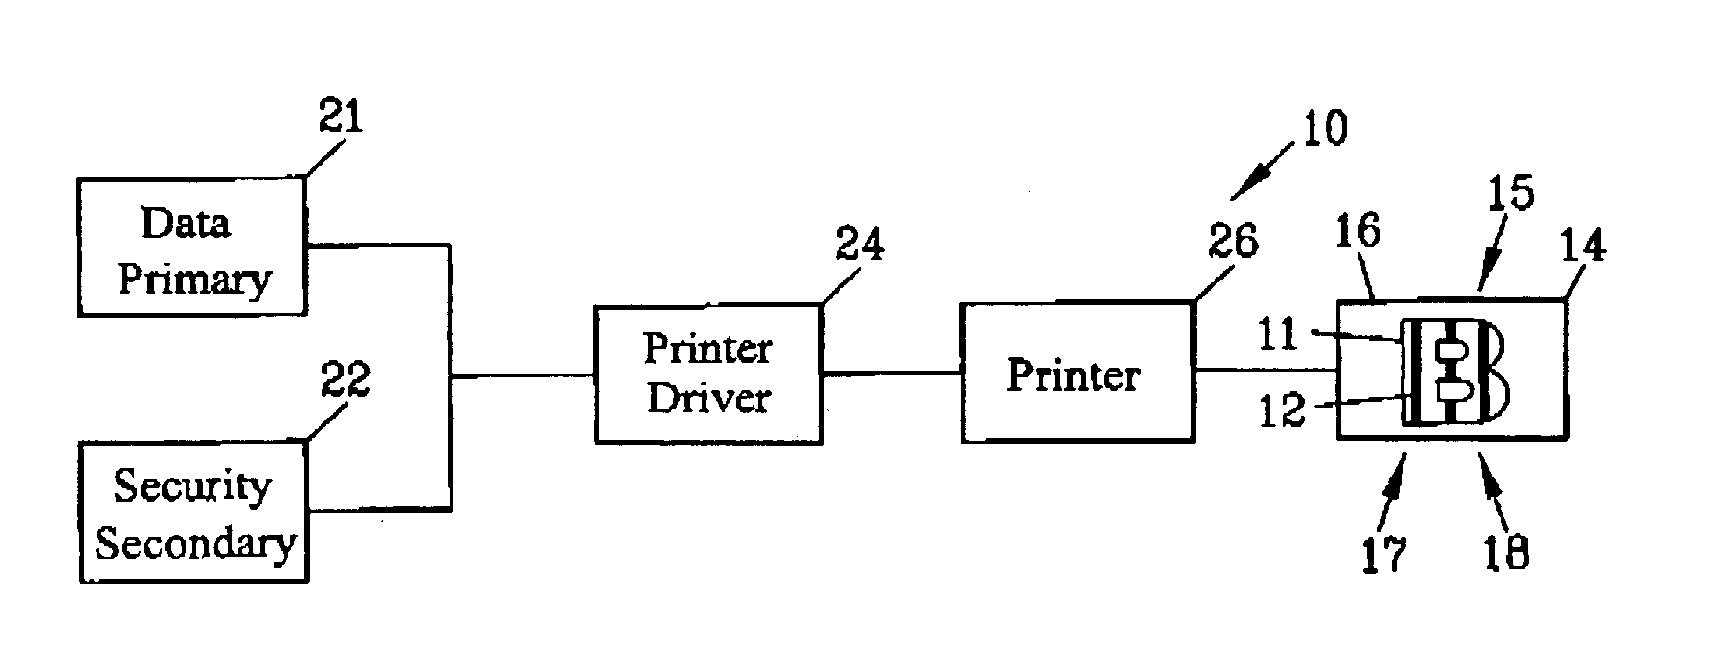 Security system for printed material